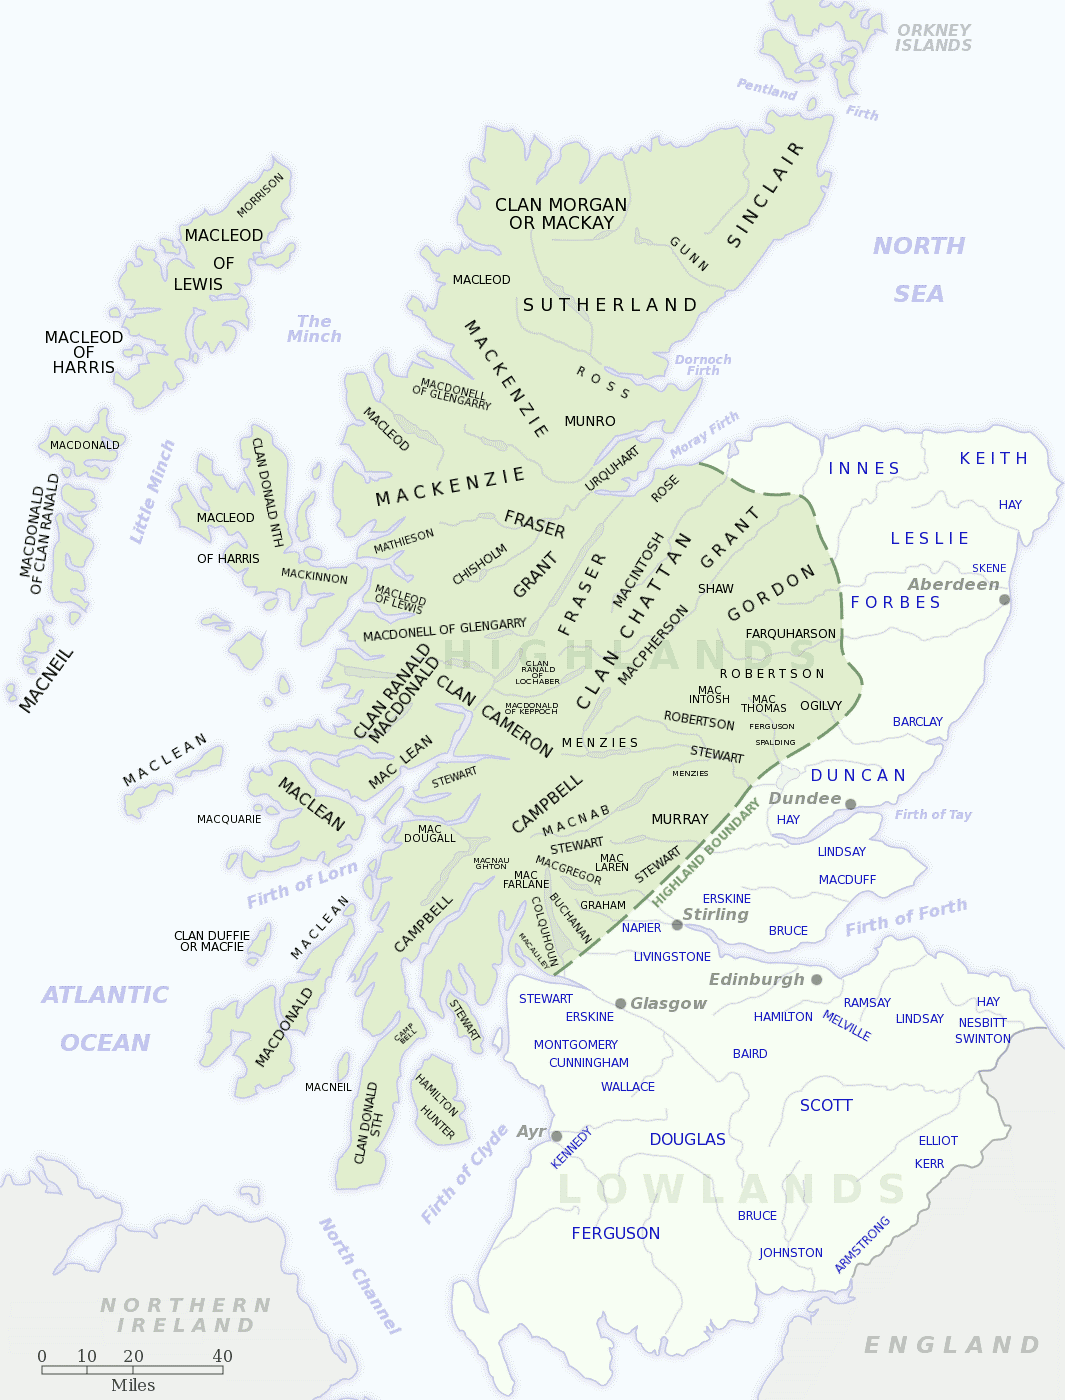 Clan-Map-of-Scotland-derived-from-The-Scottish-Clans-Their-Tartans-W.-A.K.-Johnston-1939